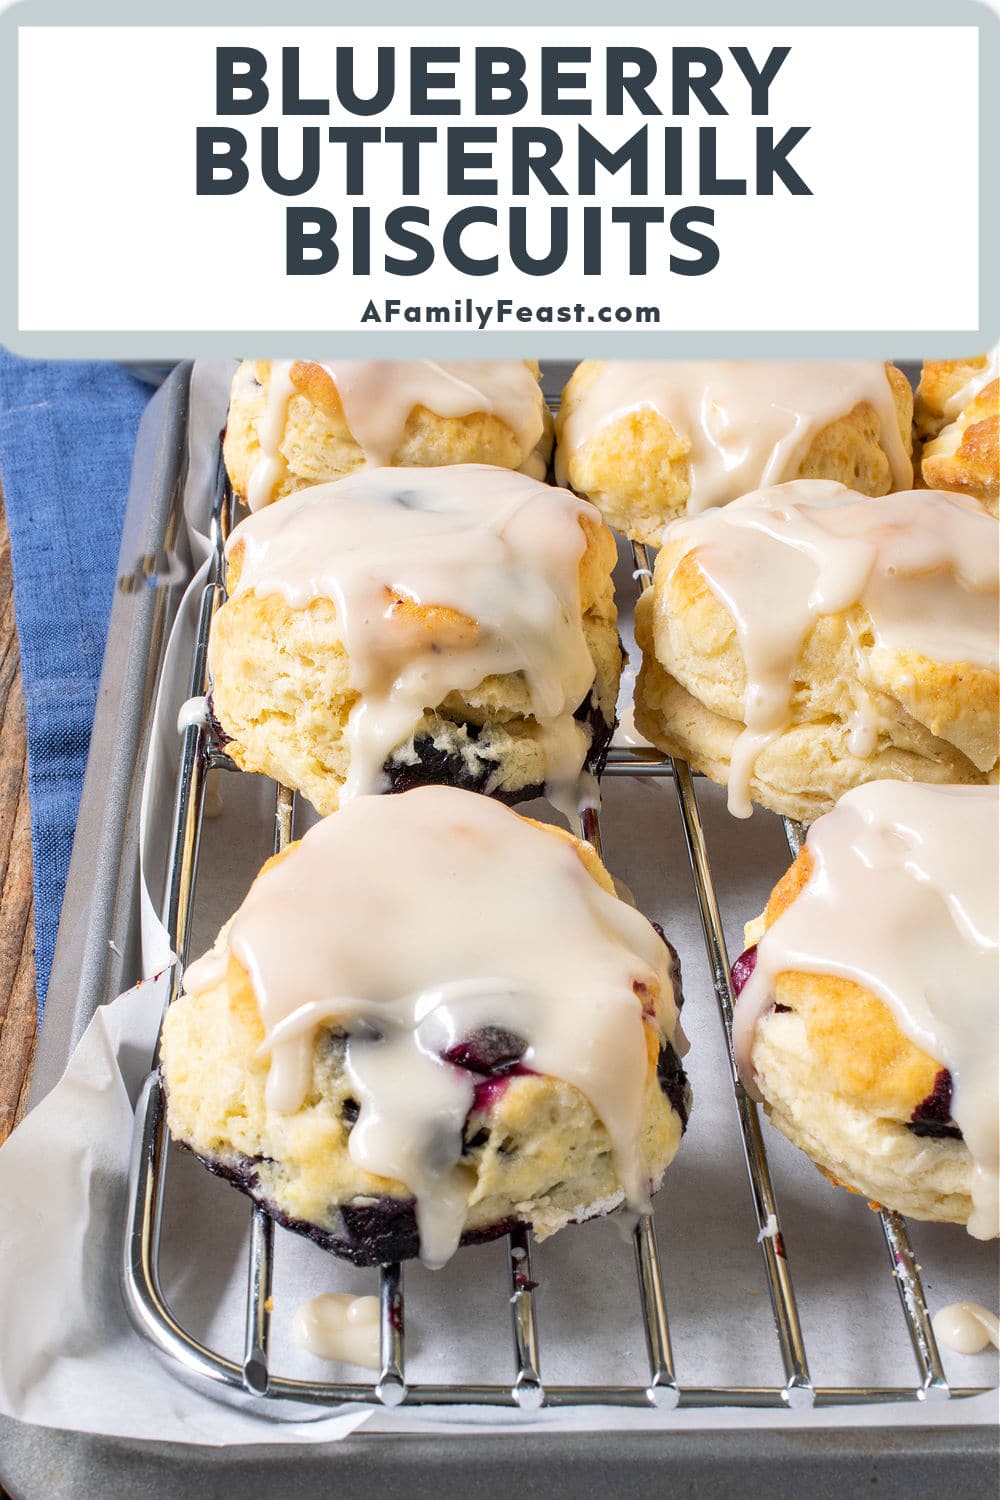 Blueberry Buttermilk Biscuits - A Family Feast